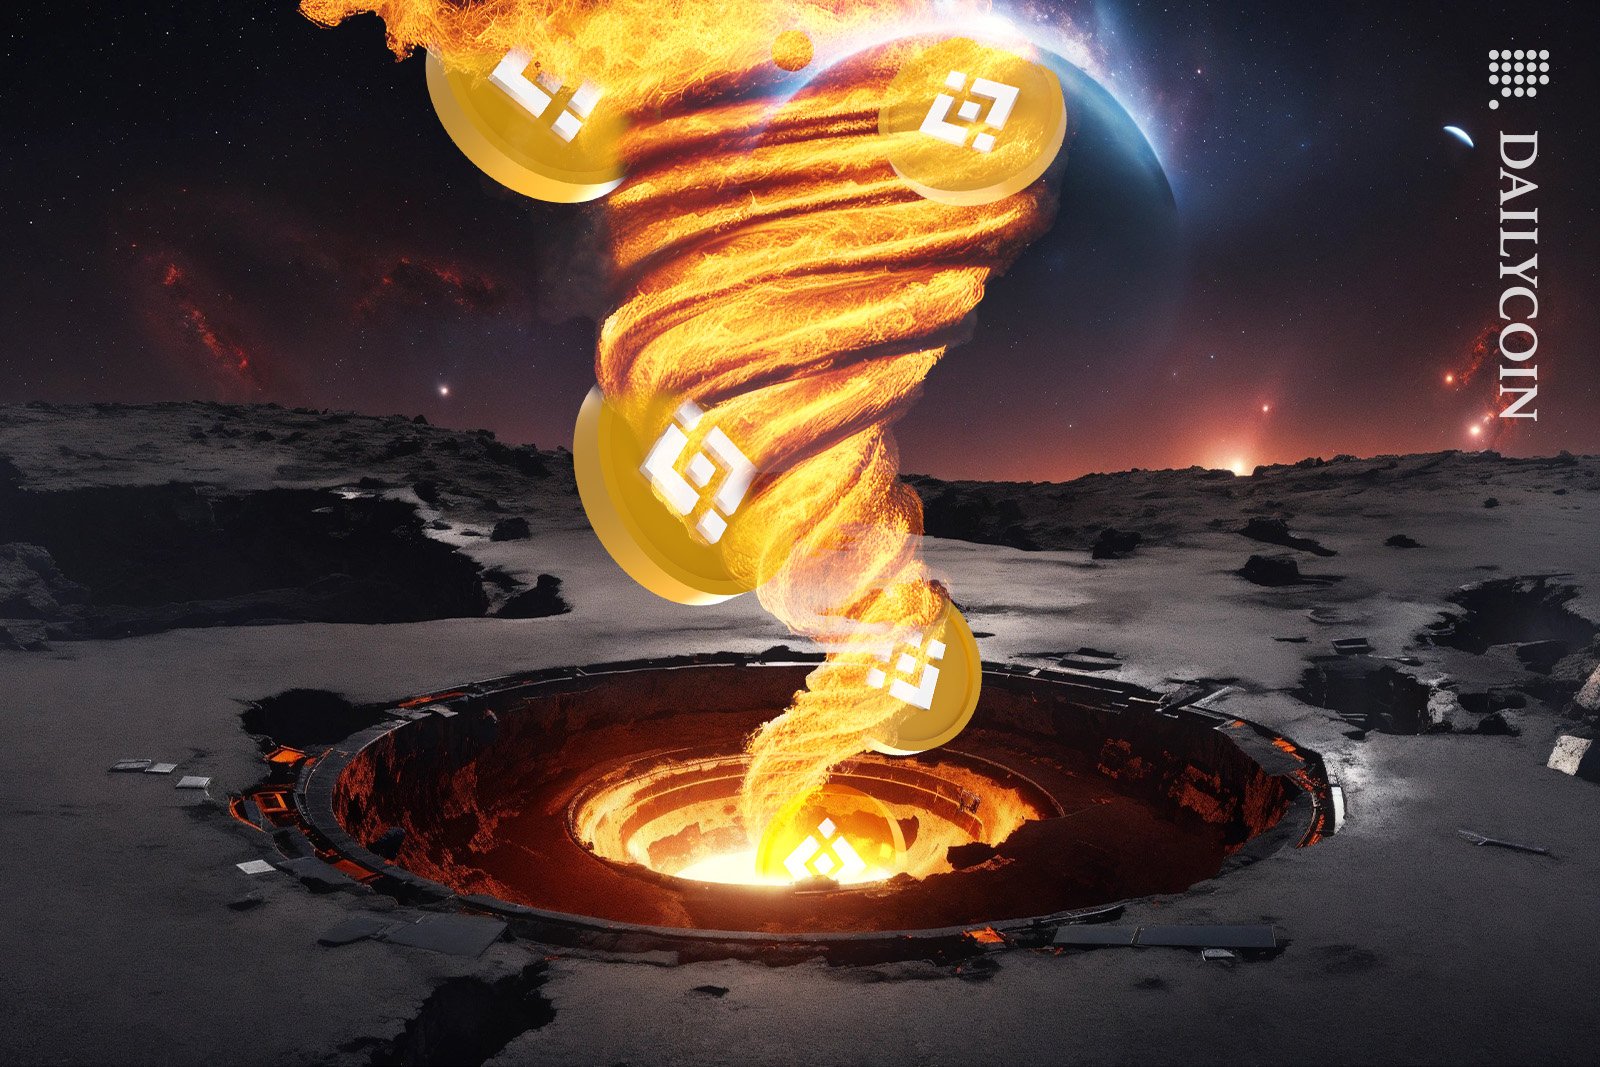 BNB tokens burning in a fire tornato from a hole in the ground.